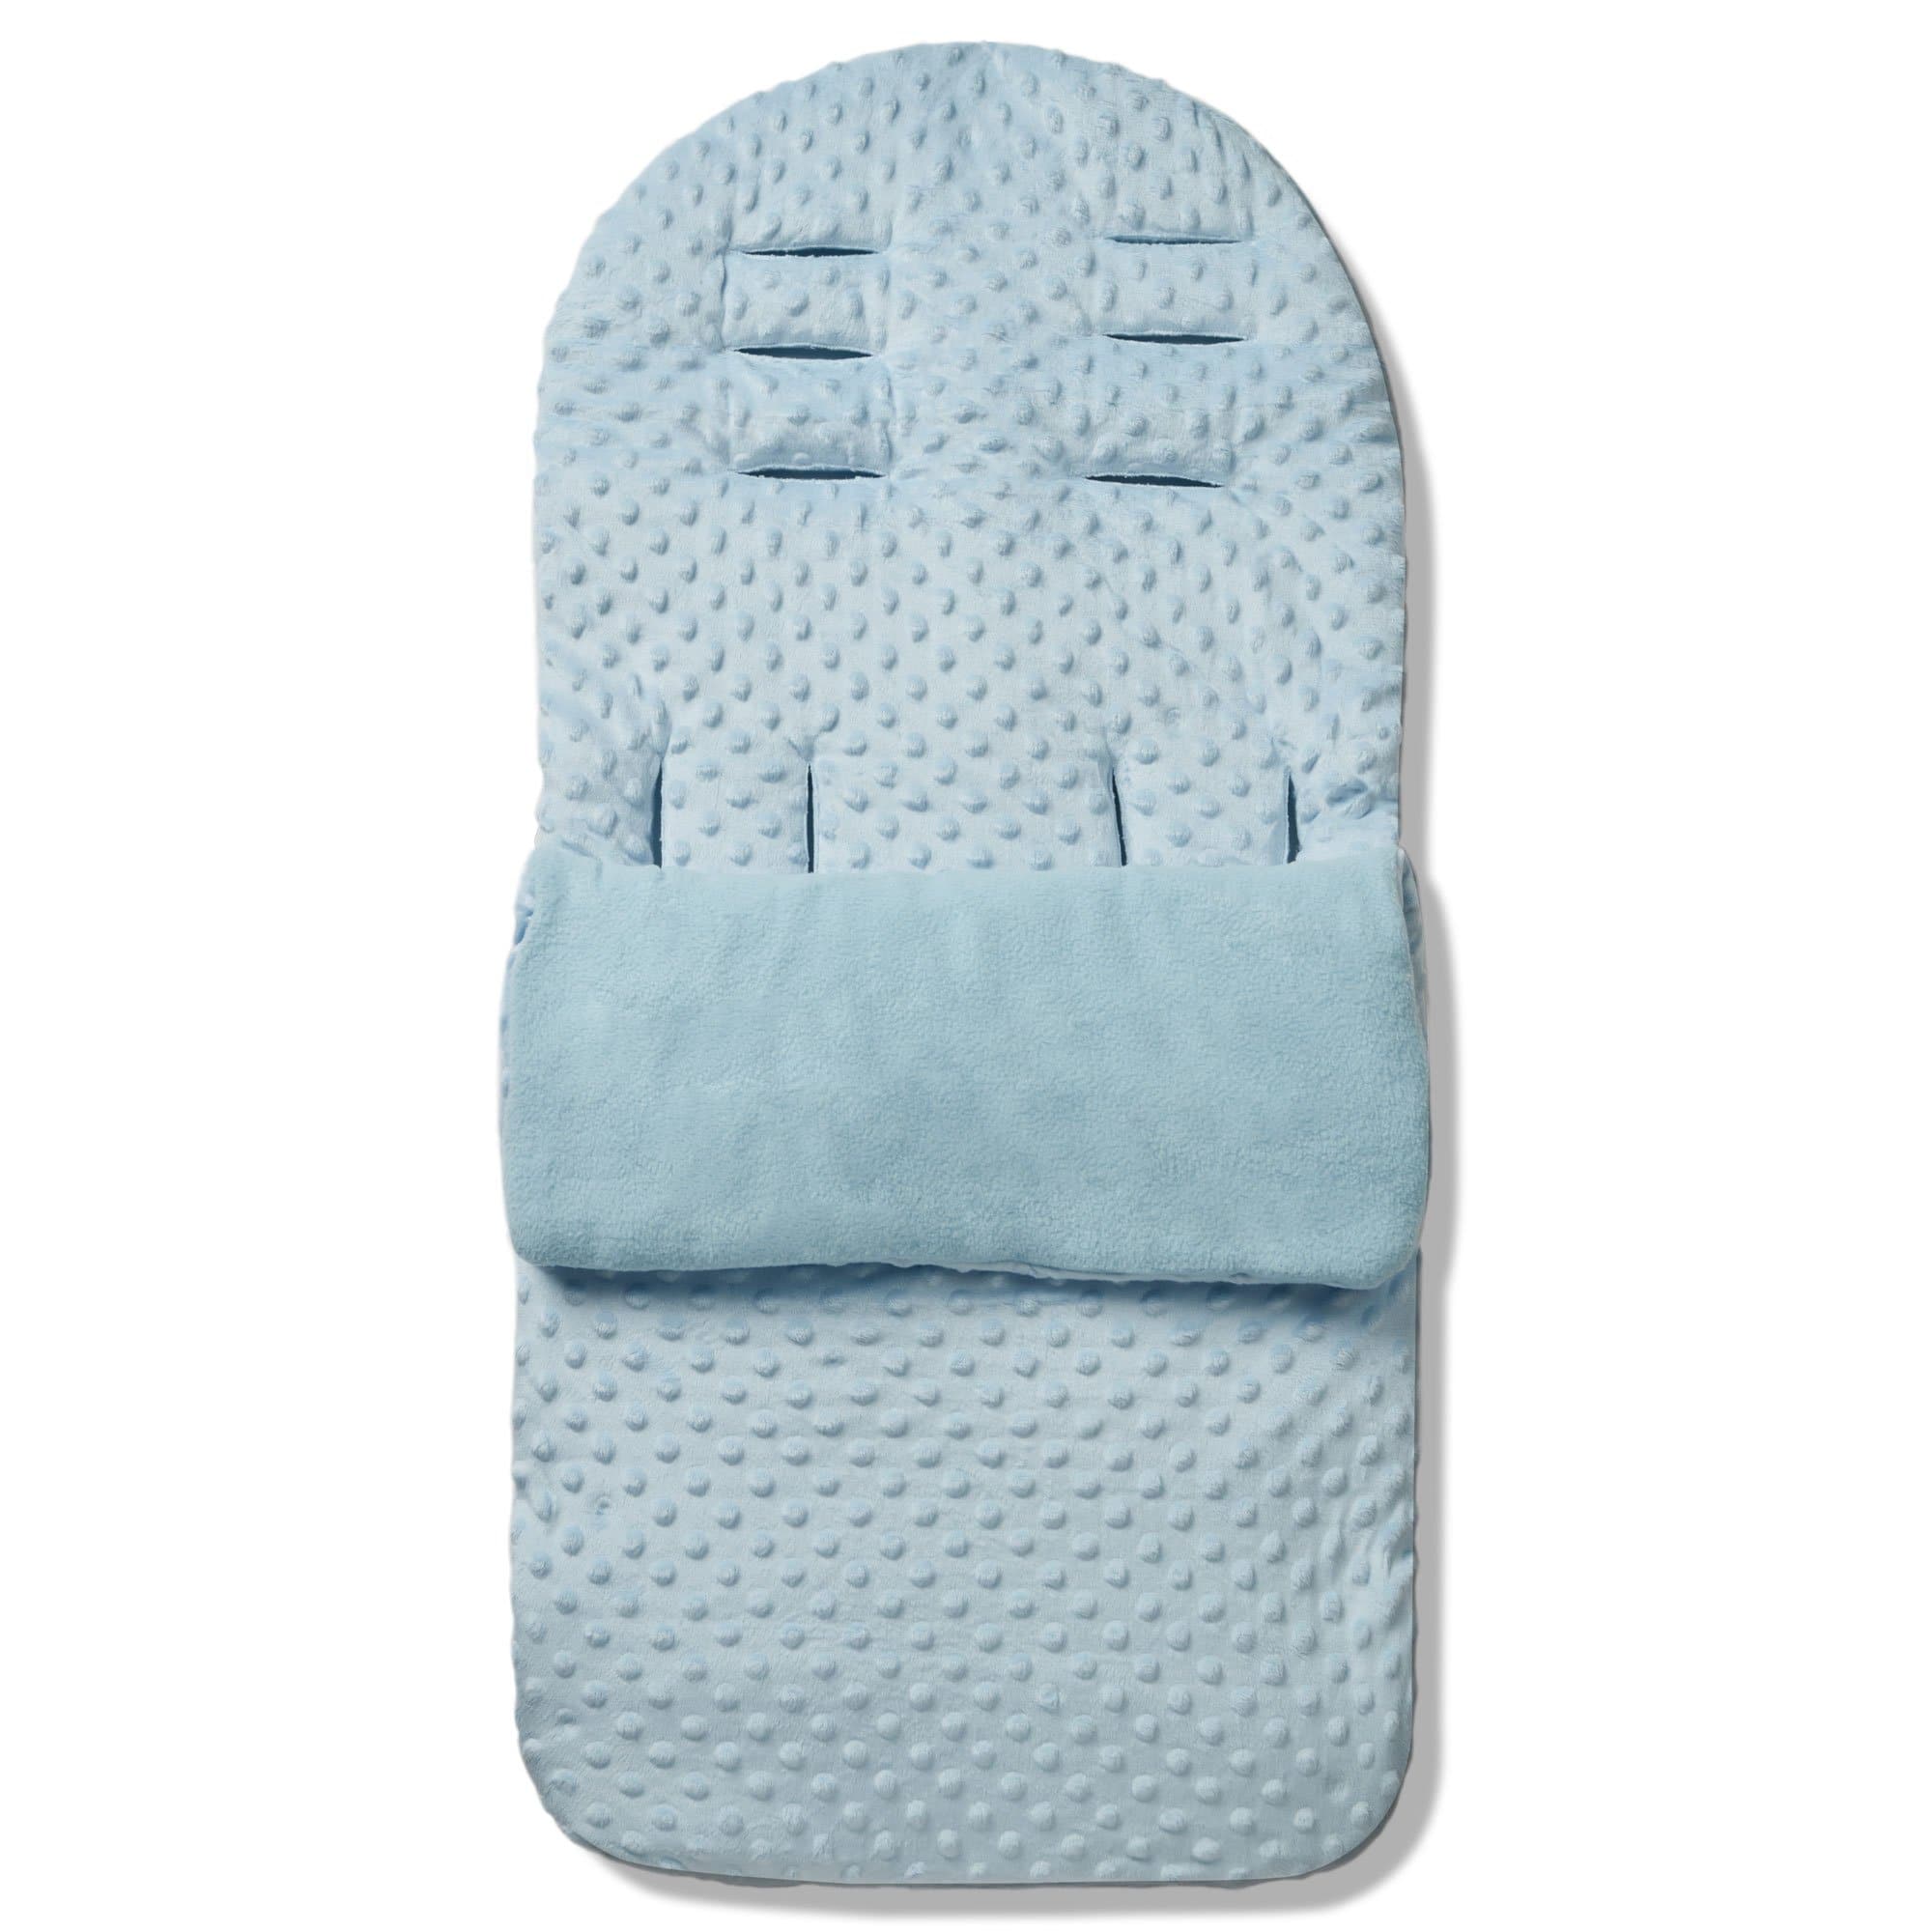 Dimple Footmuff / Cosy Toes Compatible with Nania - Blue / Fits All Models | For Your Little One